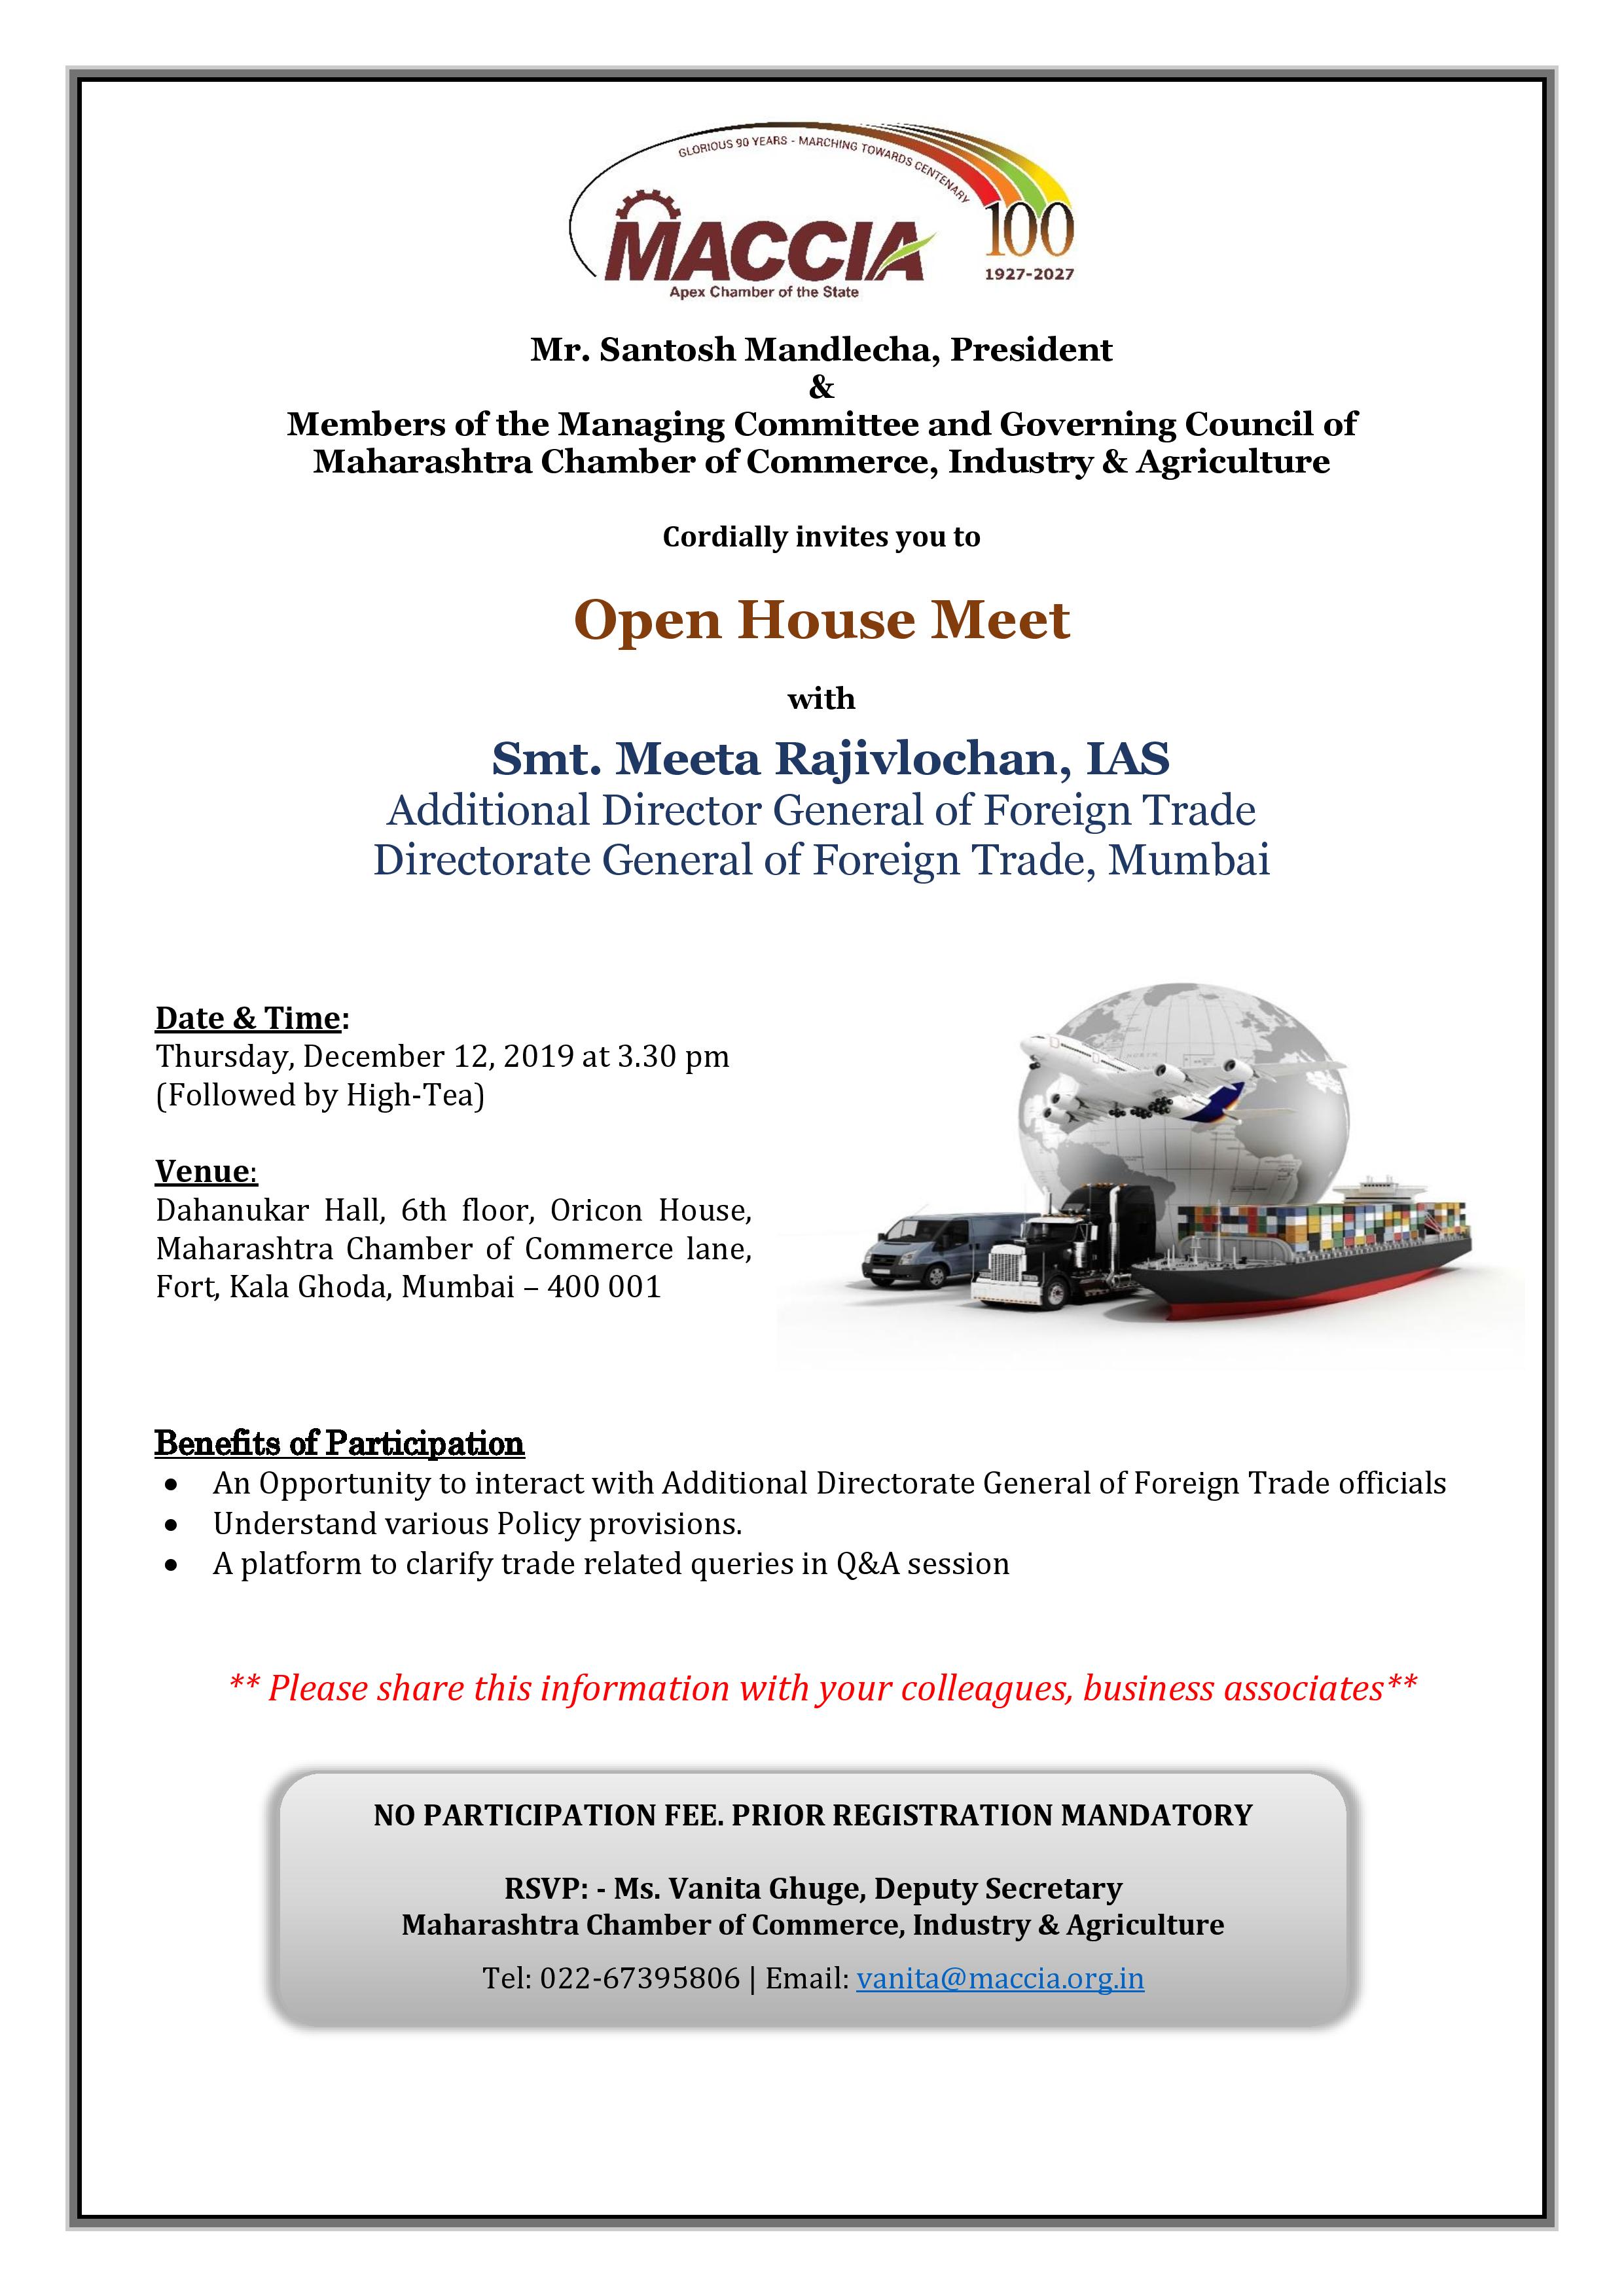  Invitation to attend 'Open House Meet with Directorate General of Foreign Trade' on December 12, 2019 at MACCIA Mumbai office.